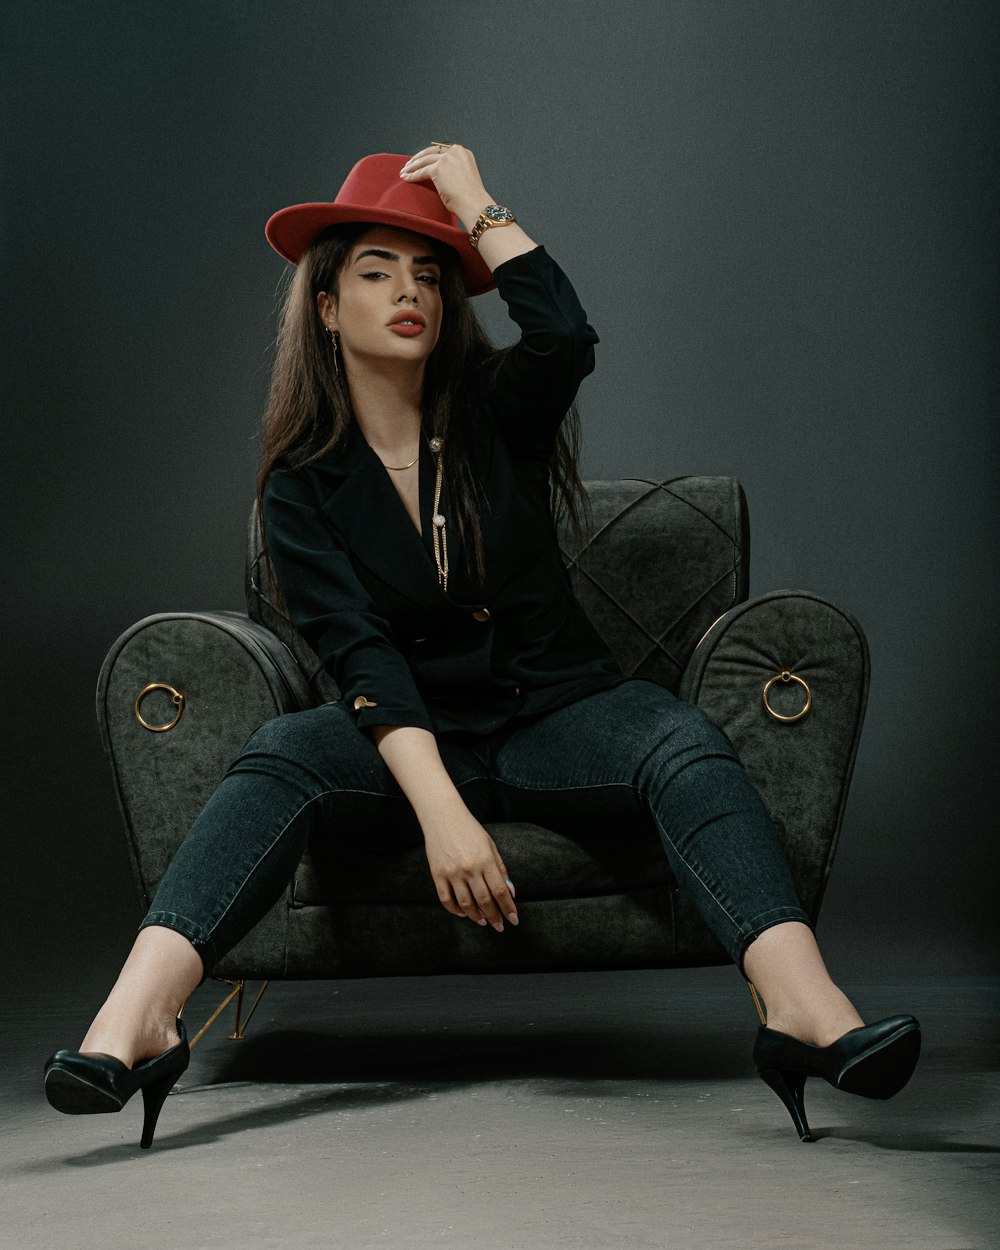 a woman wearing a red hat sitting on a chair